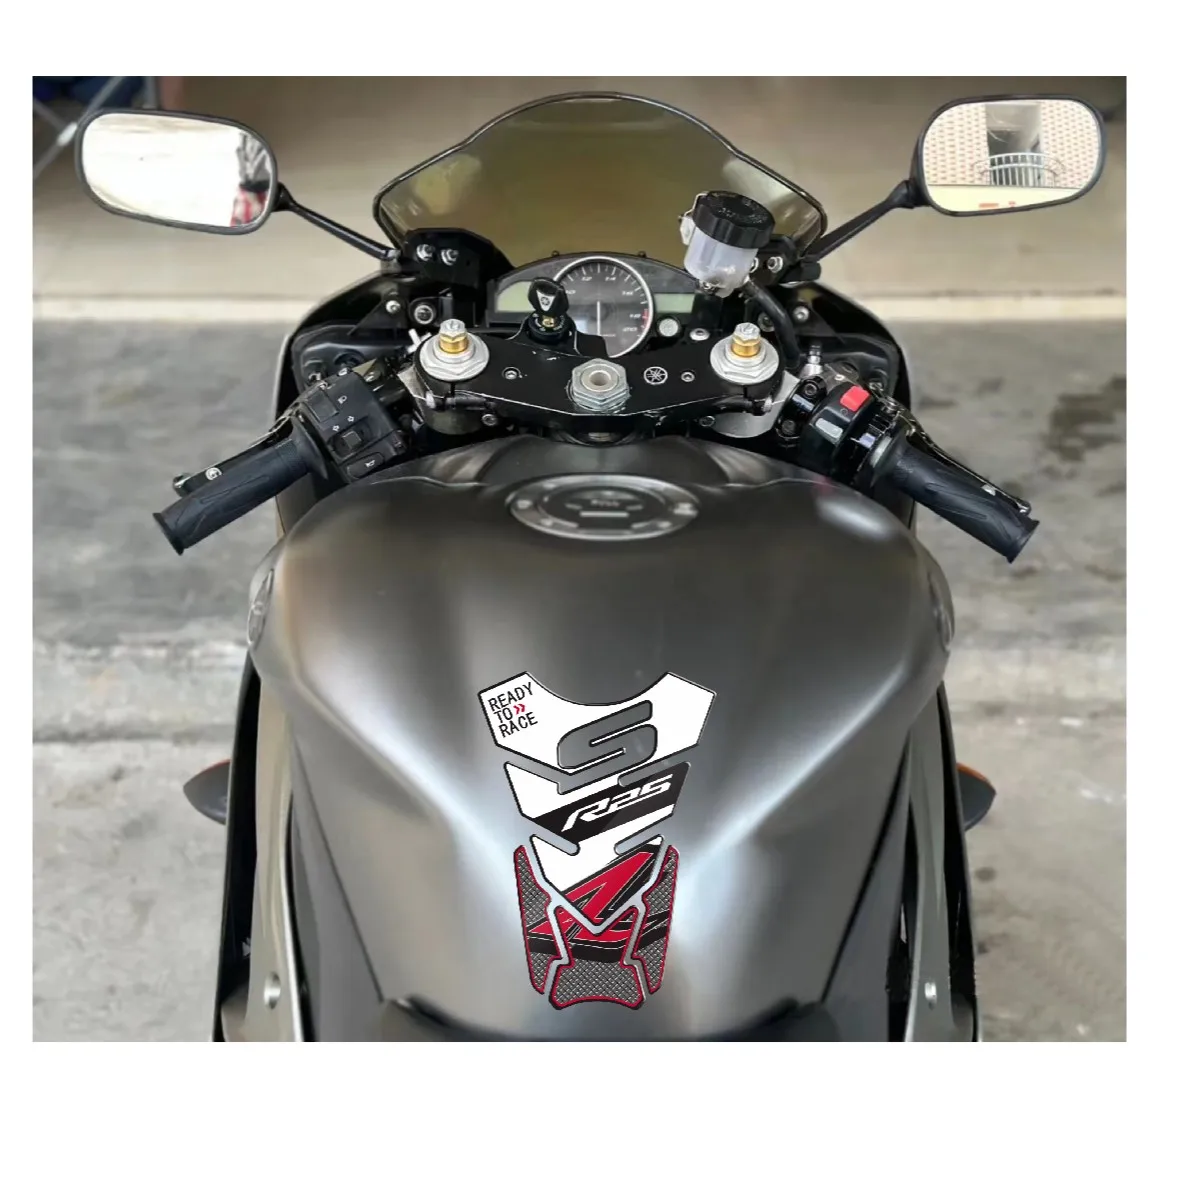 Motorcycle Tank Sticker 3D Rubber Gas Fuel Oil Tank Pad Protector Cover Sticker Decals For YAMAHA YZF-R25 R25 R 25  R250